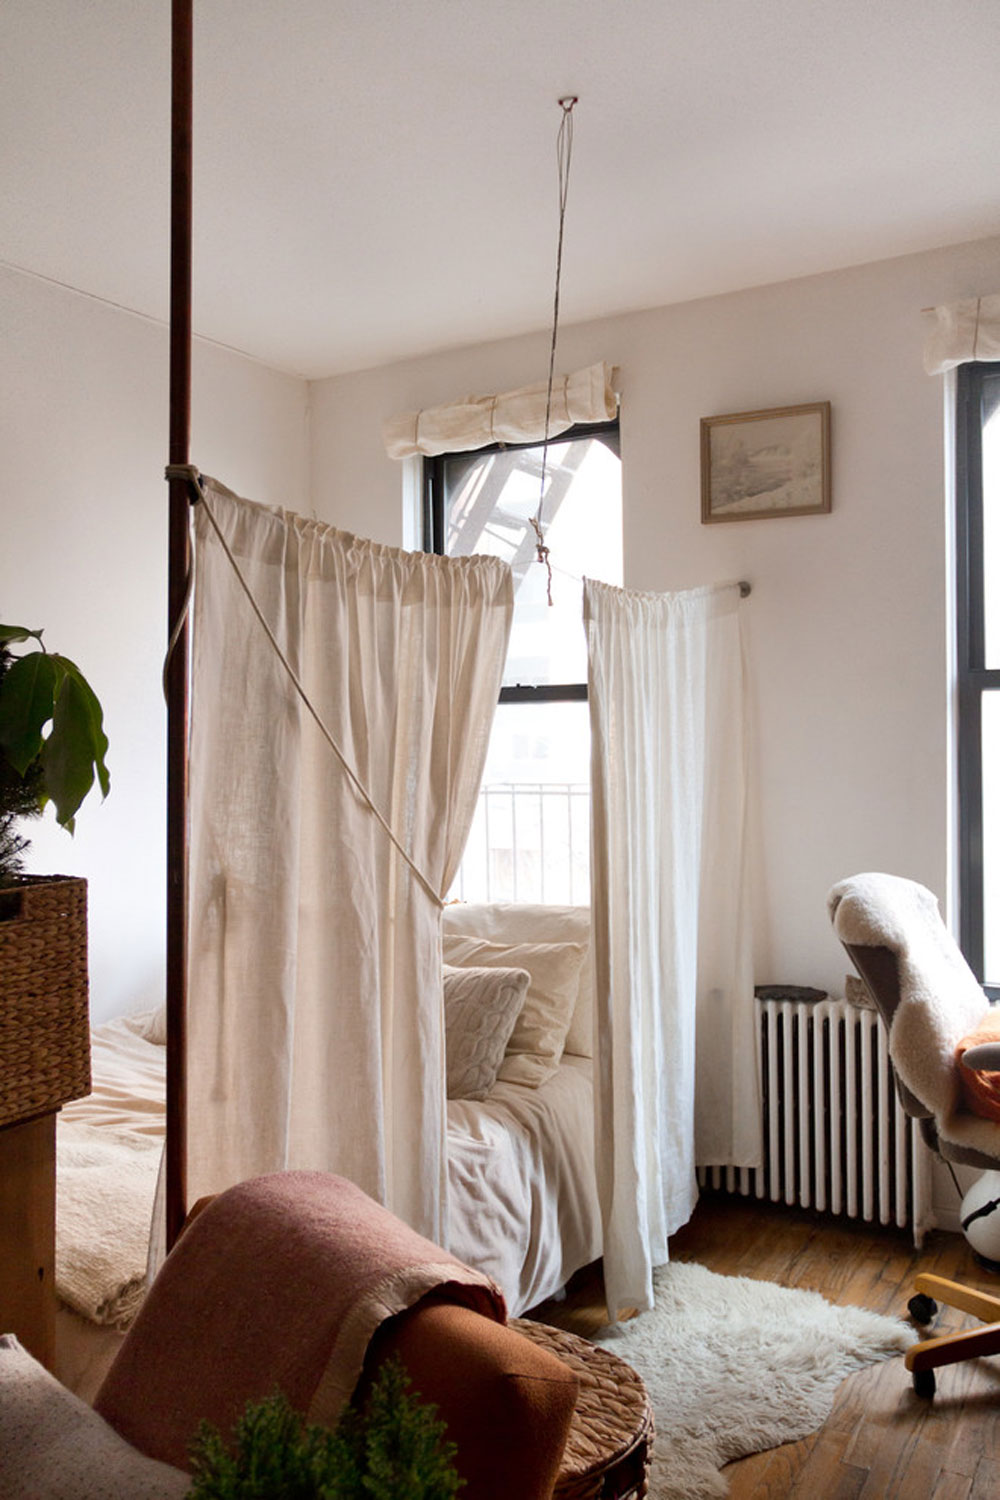 My-Houzz-Willa-Kammerer-by-Rikki-Snyder Small apartment decorating ideas on a budget